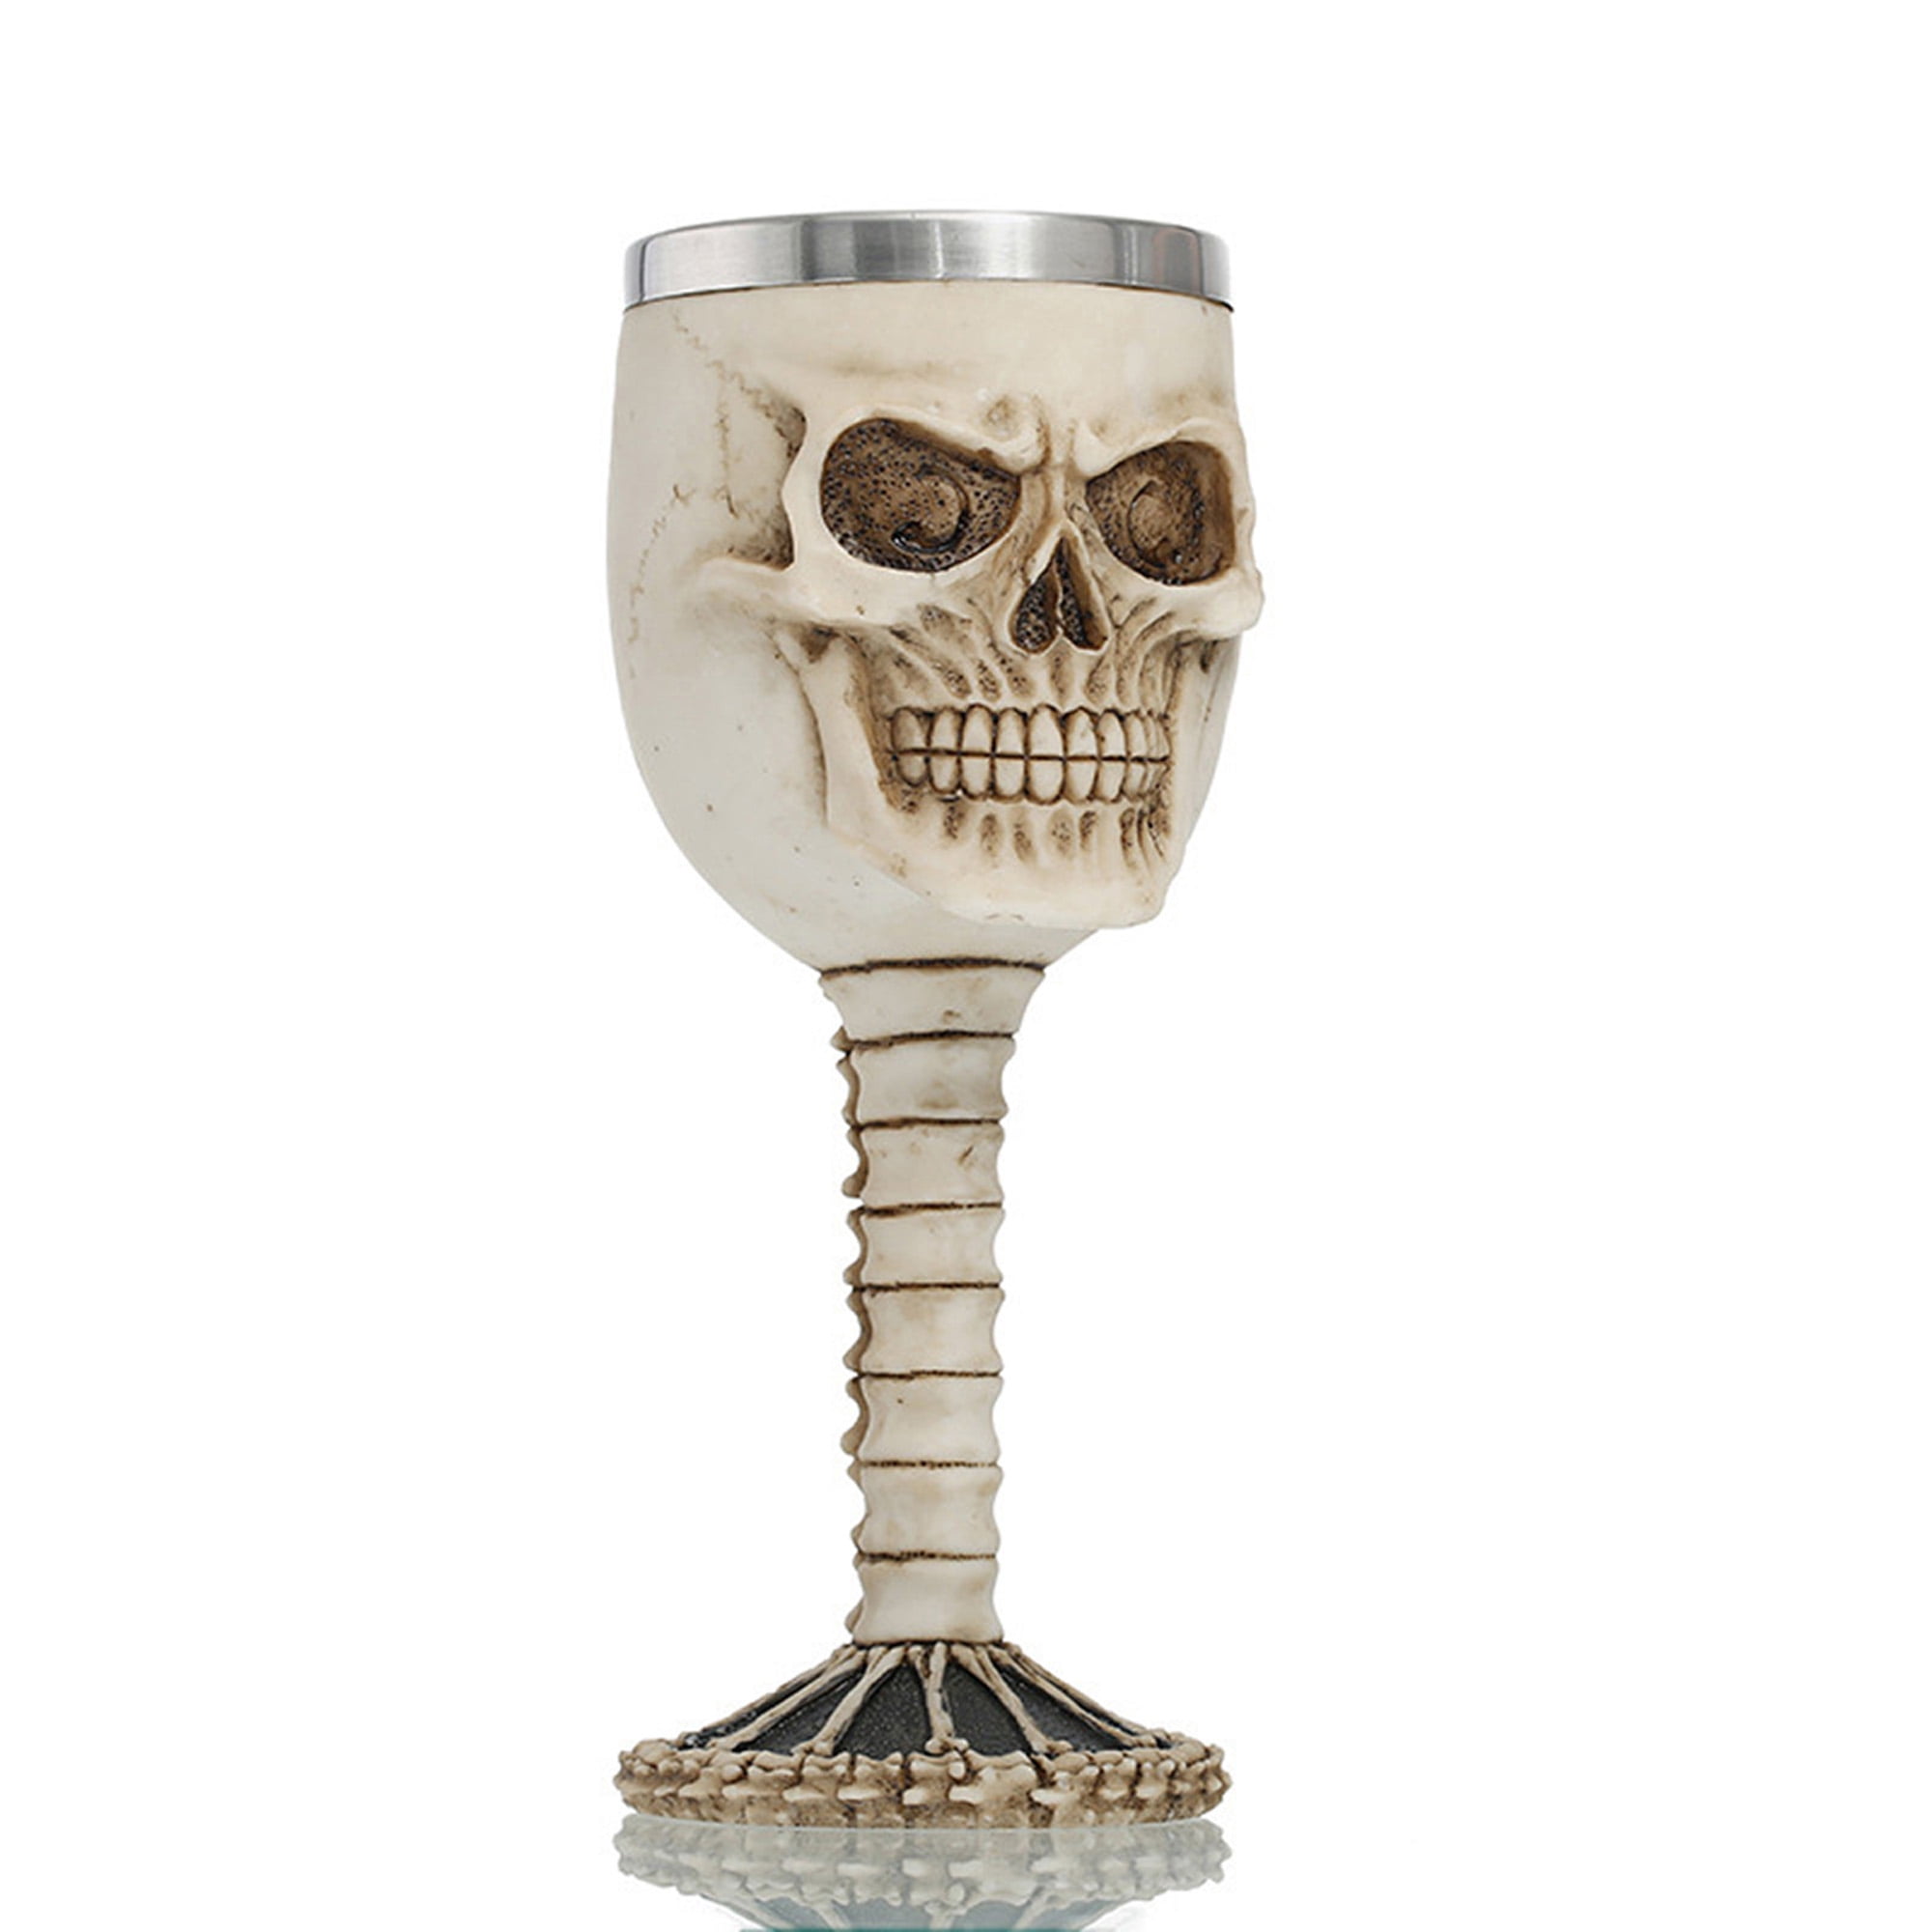 Rhode Island Novelty Flashing Skull Mug - Unique Lights Drinking Mug For  Halloween Cocktail, Birthday Squad Cups, Fun Drinking Accessories, Novelty  LED Light Up Party Mugs for Kids and Adults - 16